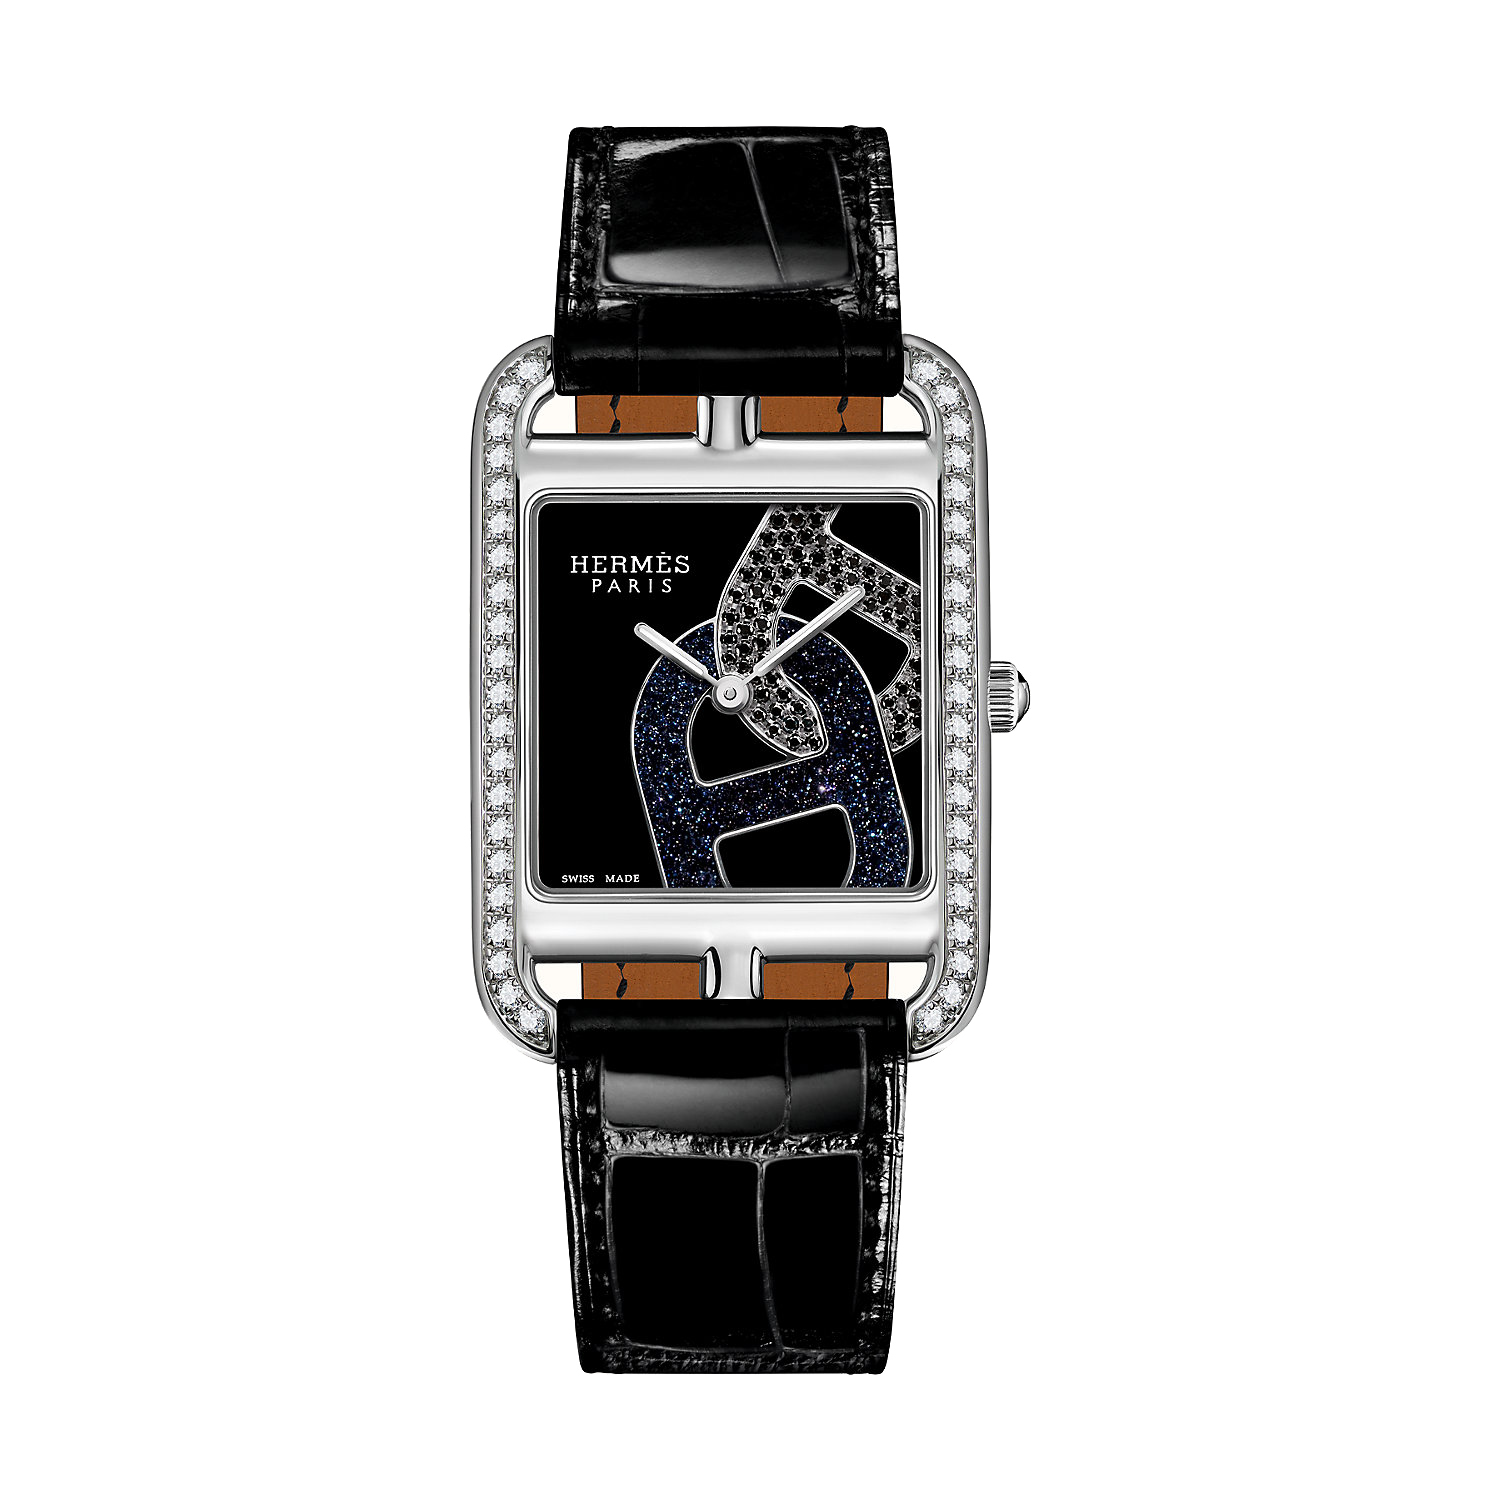 Hermès-cape-cod-chaine-d-ancre-joaillier-29-x-29mm-Hall-of-Time-047237WW00